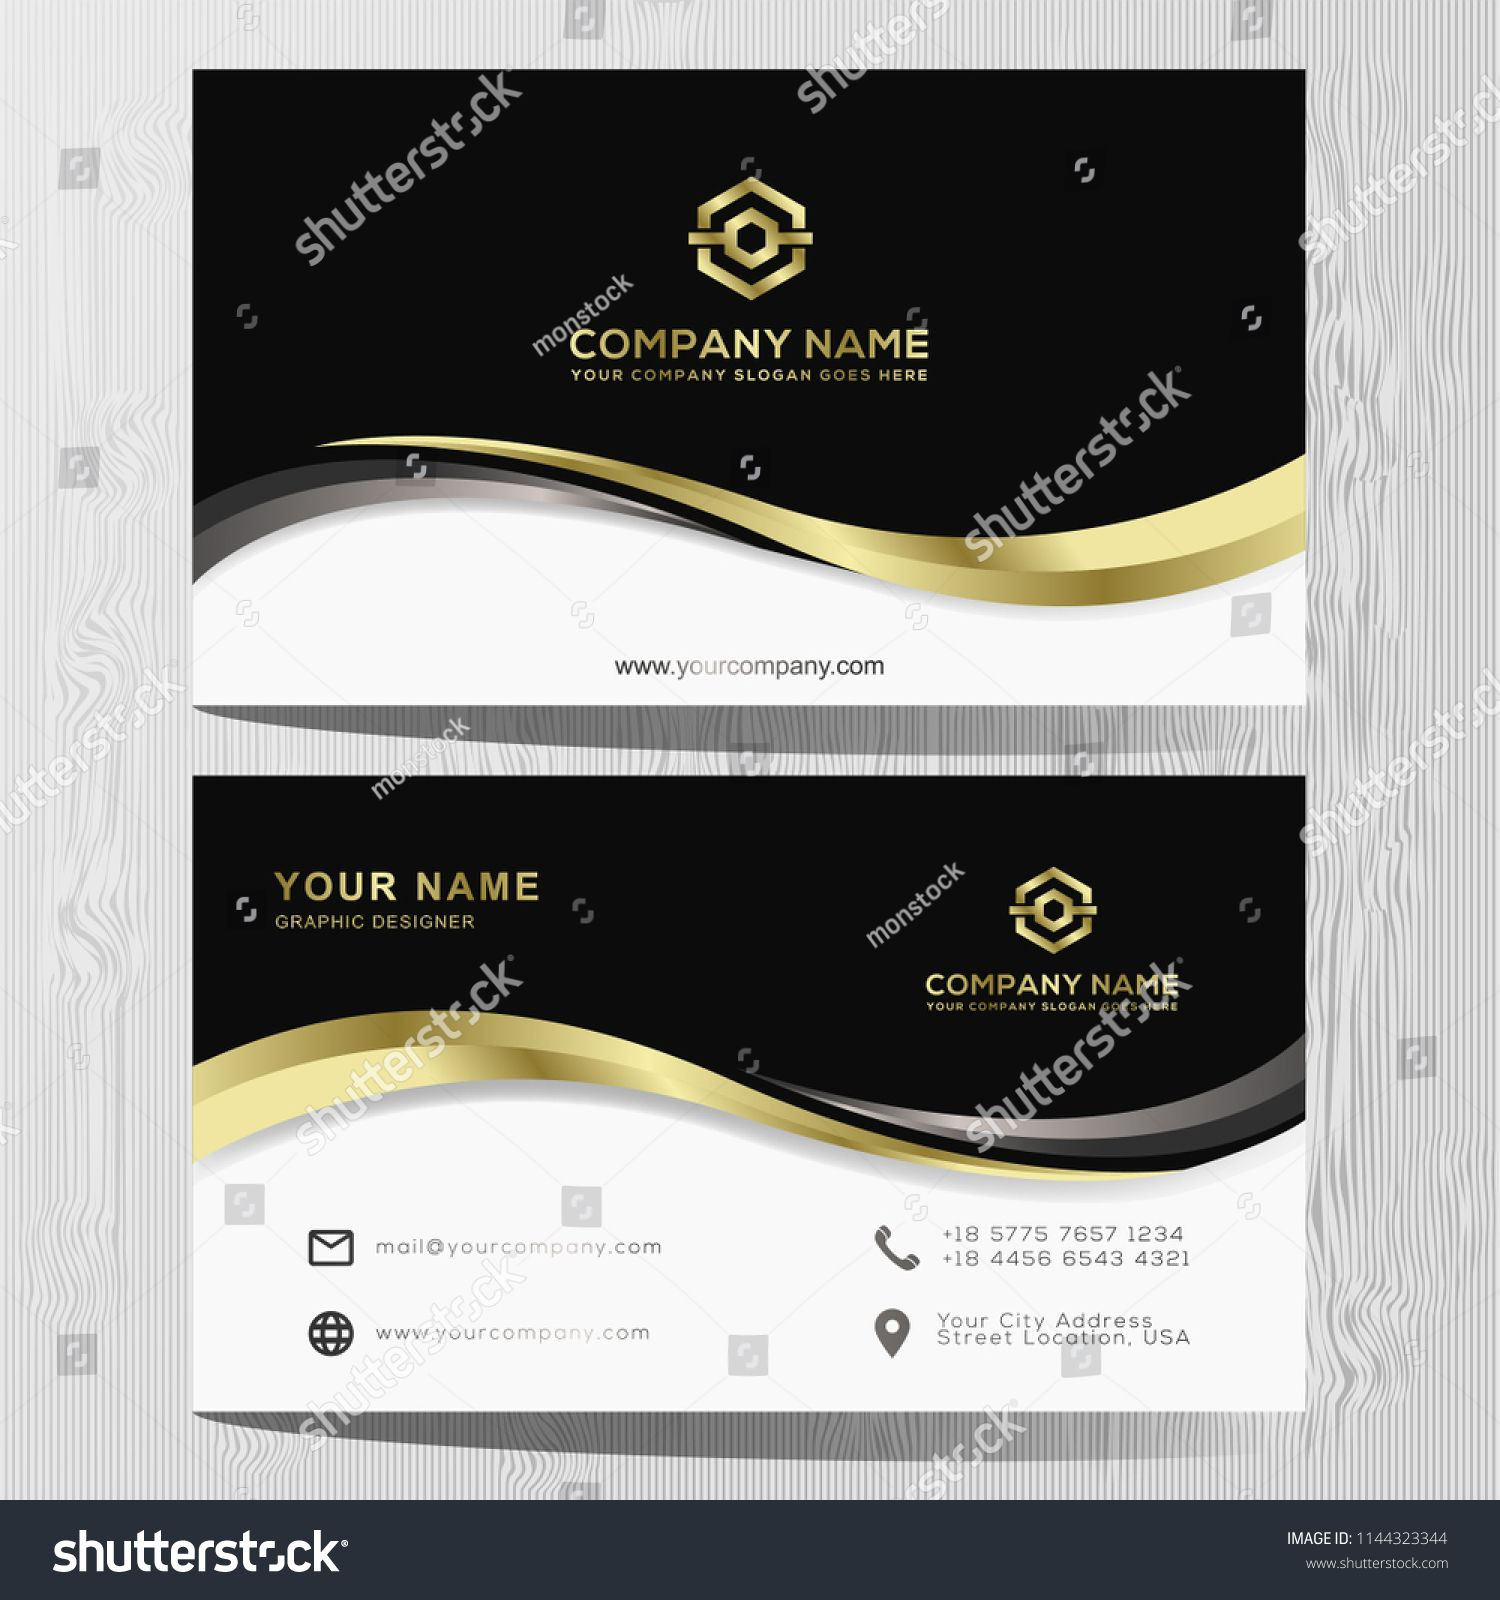 Luxury and Elegant Black Gold Business Cards Template On Of Elegant Business Card Templates